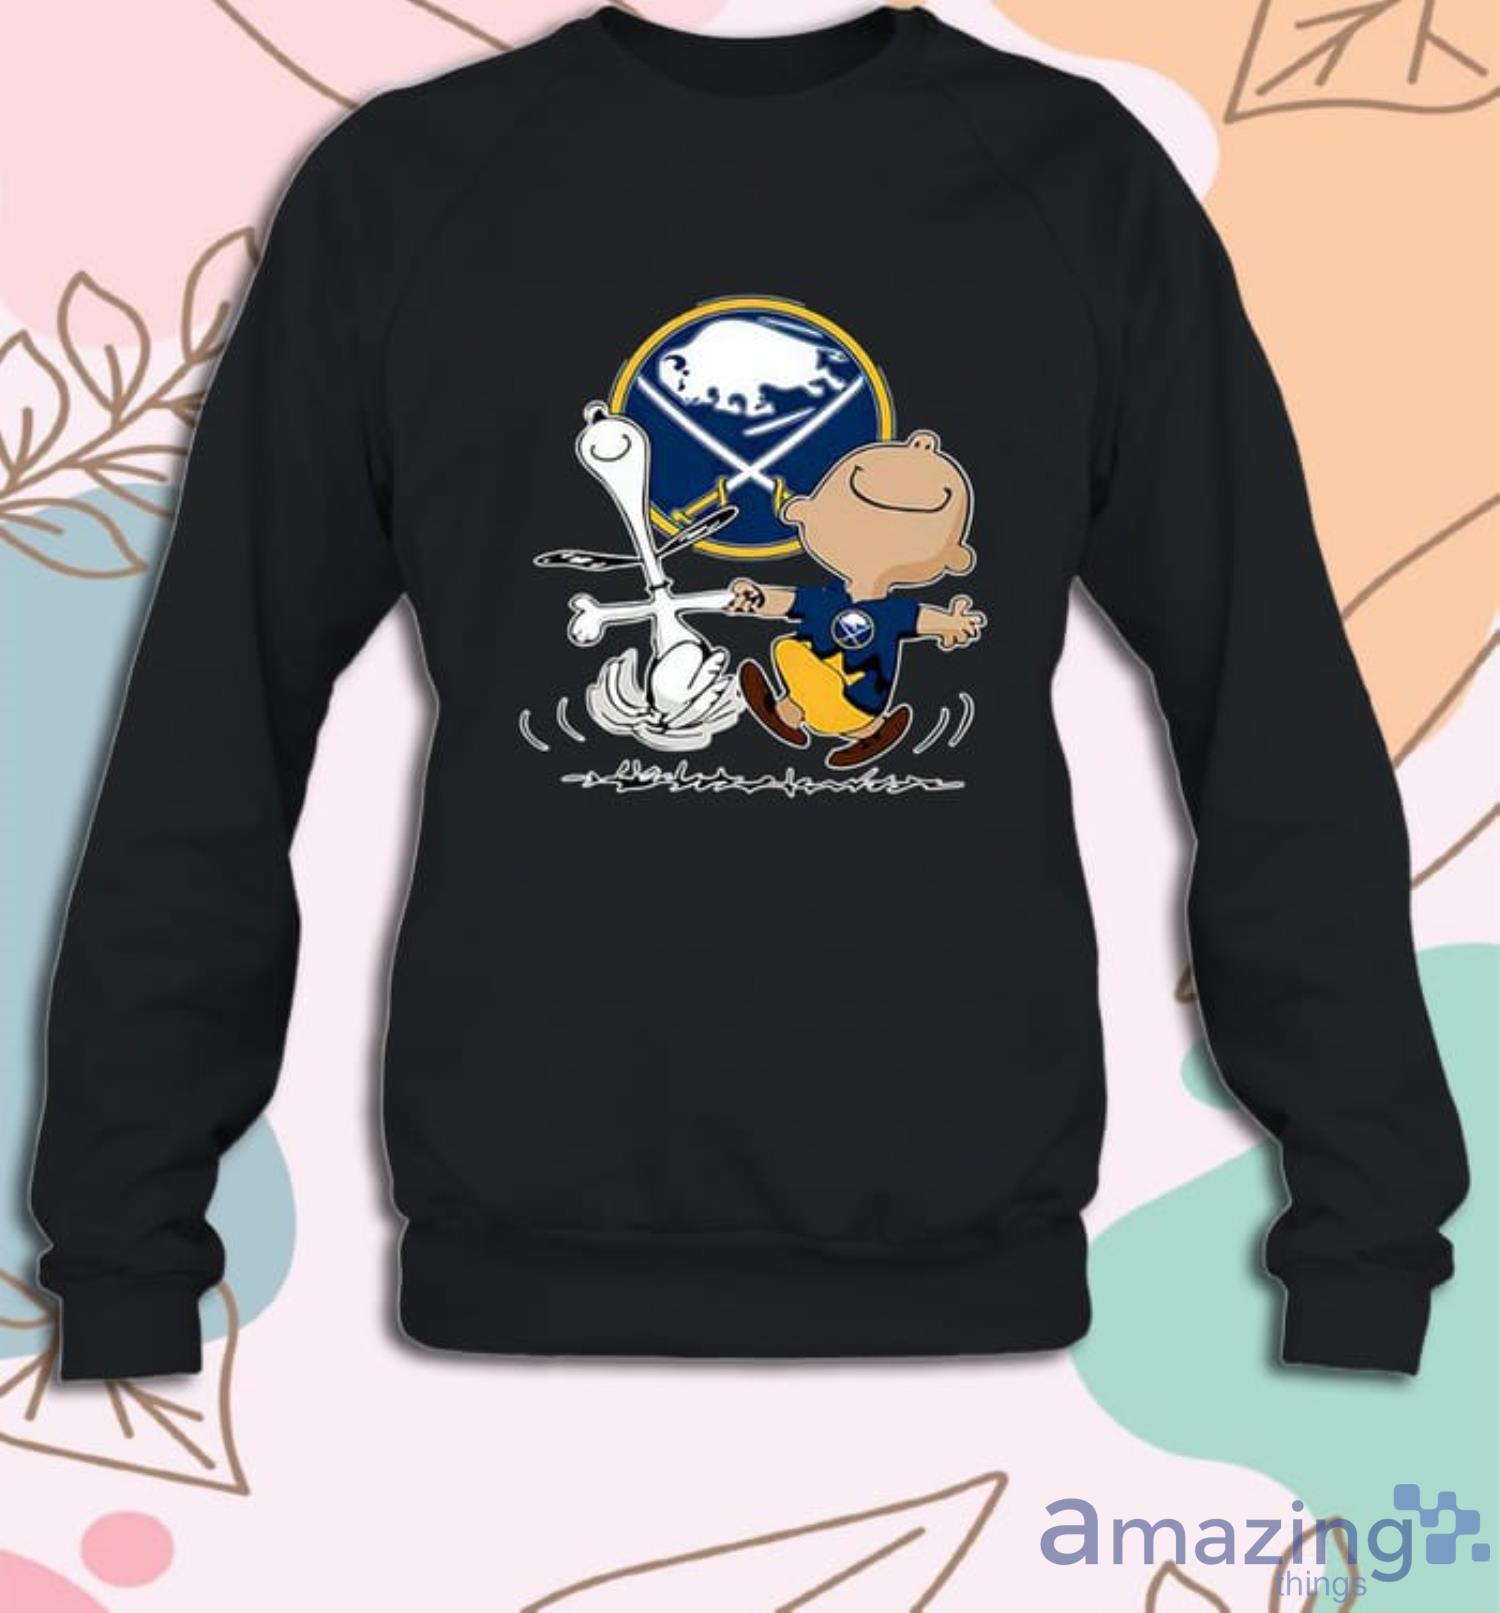 Top-selling item] Buffalo Sabres Snoopy For Fans Baseball Jacket